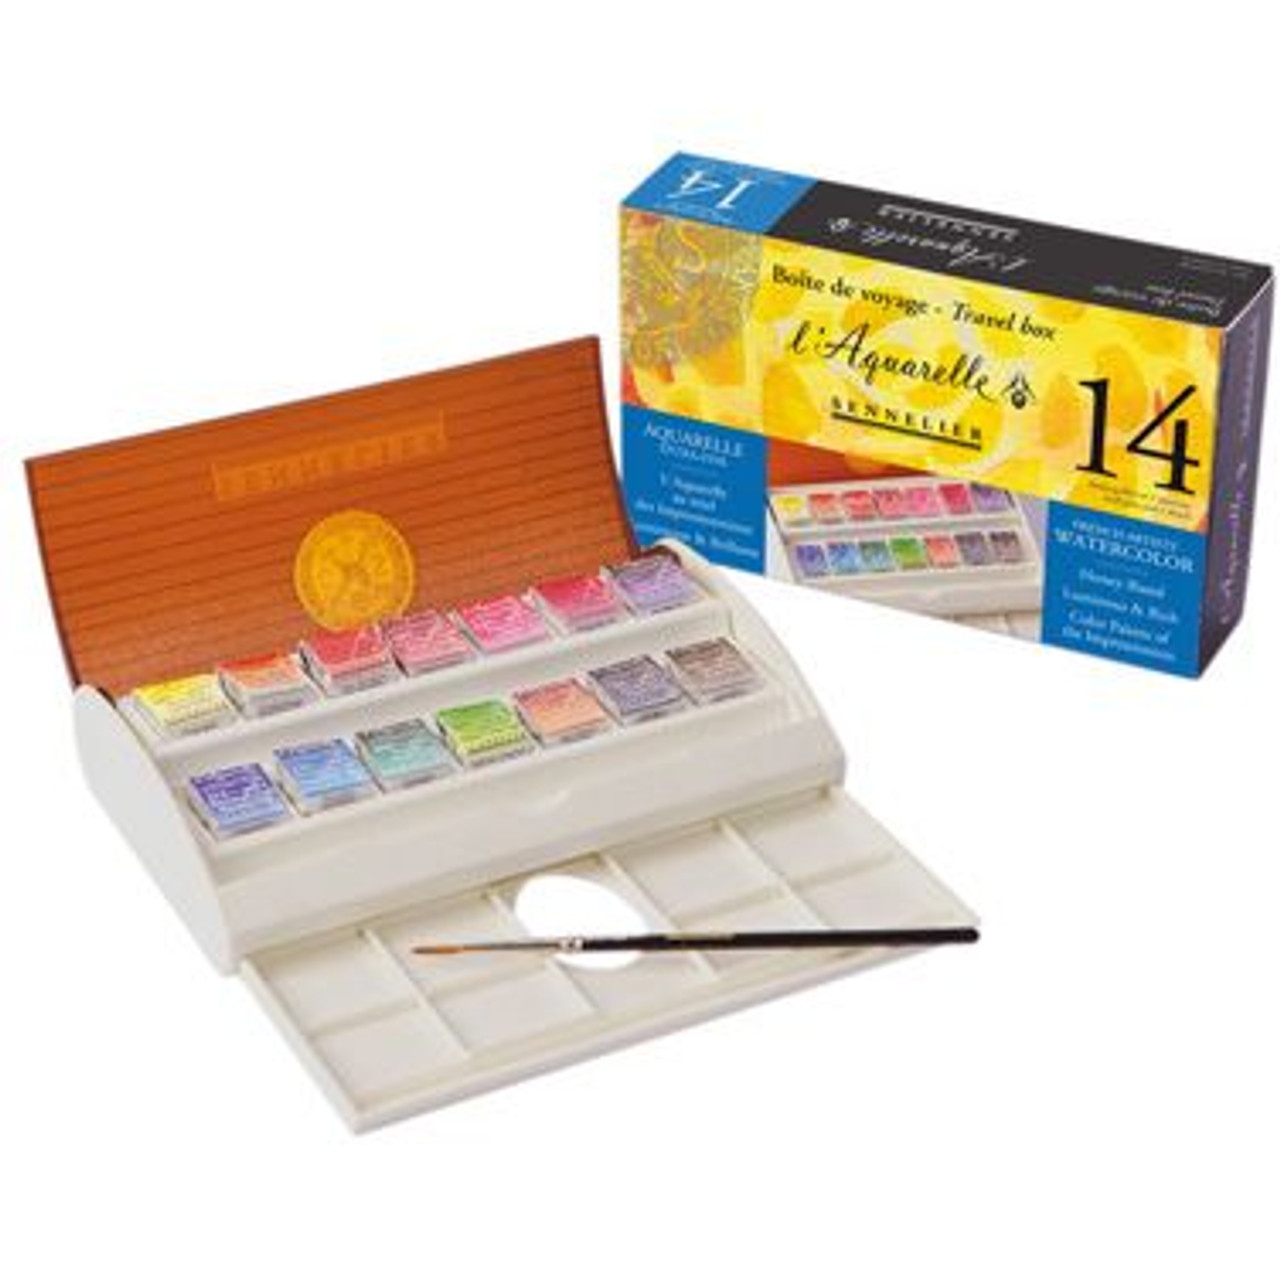 Sennelier French Artists' Watercolor Tubes and Sets